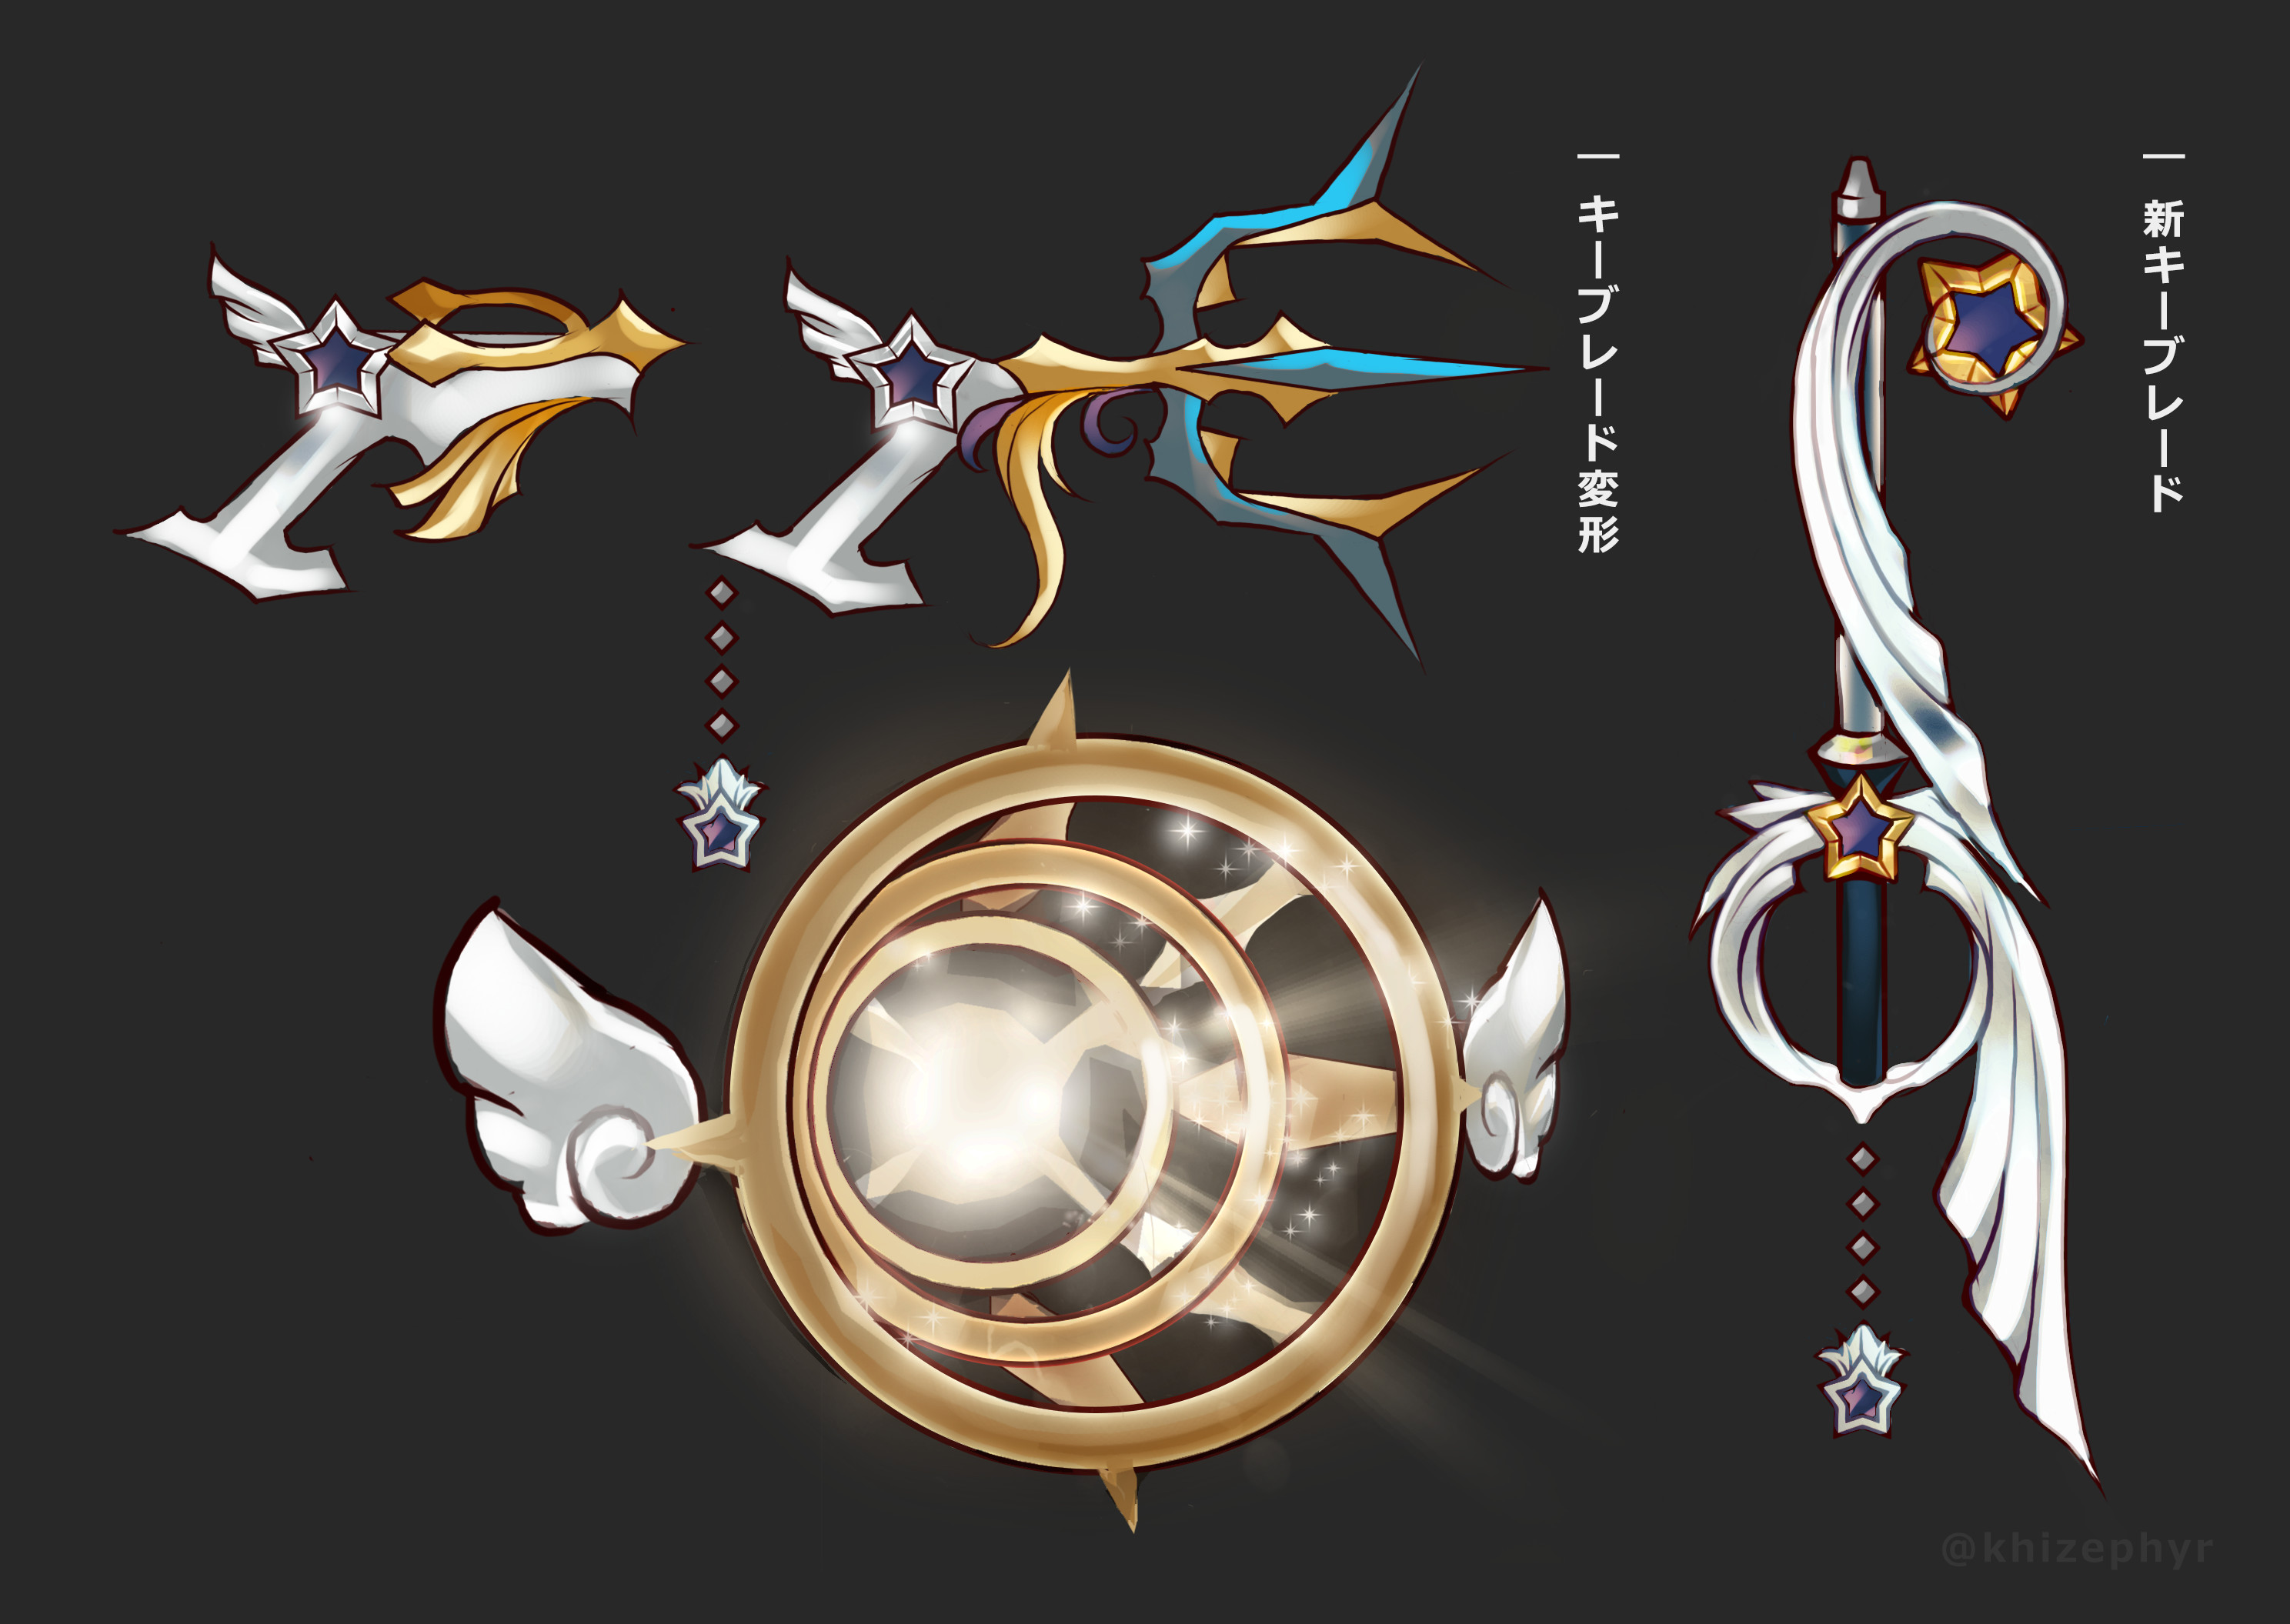 2976x2111 KHI Rendition of Sora's Keyblade & Transformations from KH3 Footage